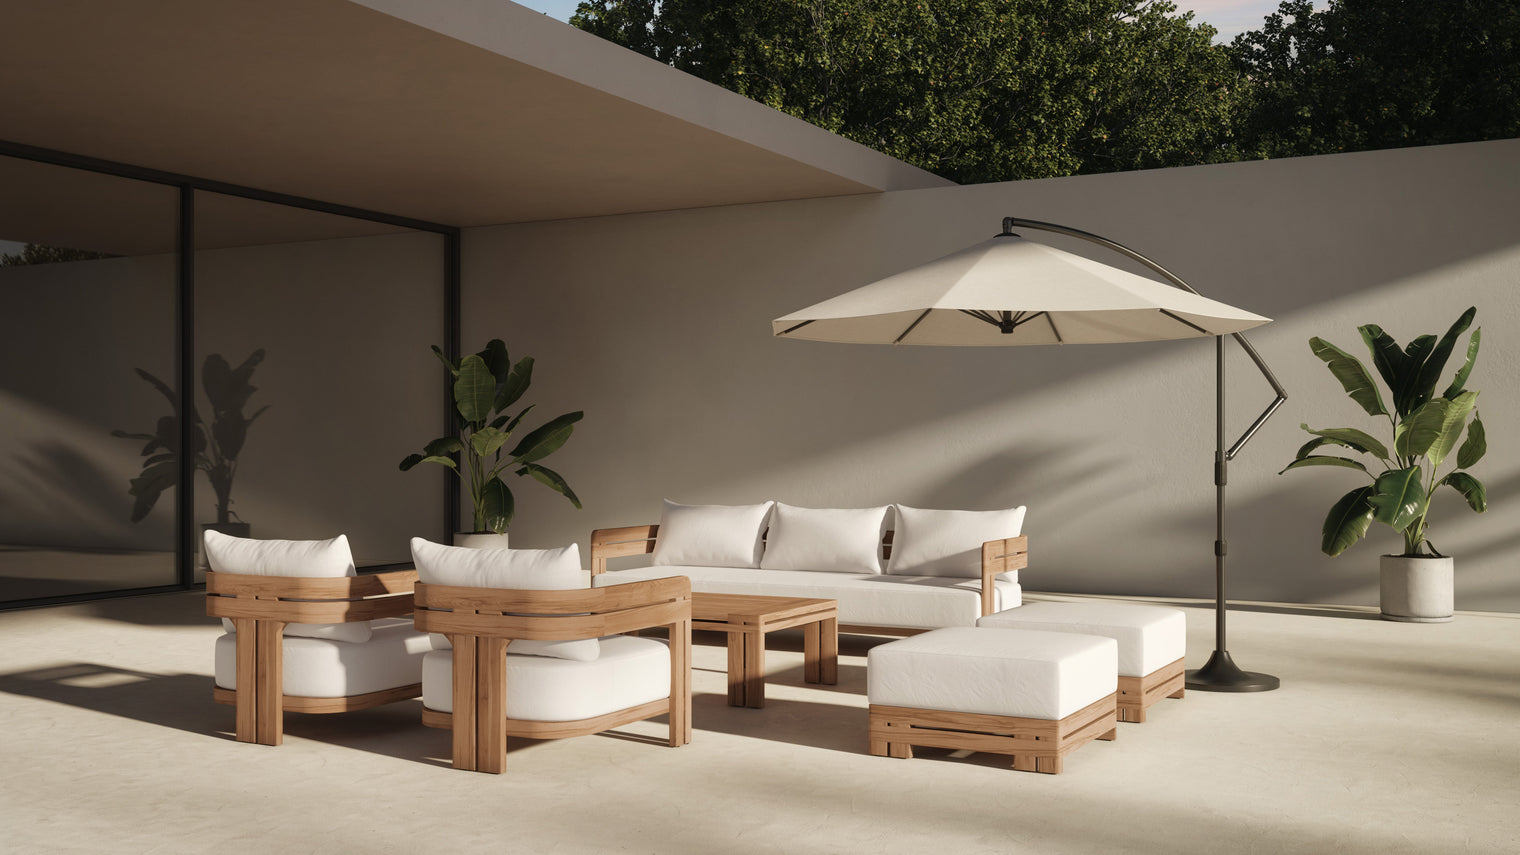 A stunning take on Teak | Crafted from premium teak wood renowned for its resilience, the Lusso Outdoor Collection is built to withstand the elements while retaining its beauty for years to come. The warm, honey-toned hue of the teak wood adds a touch of warmth and sophistication to any outdoor setting, creating an inviting atmosphere for gatherings with loved ones.
